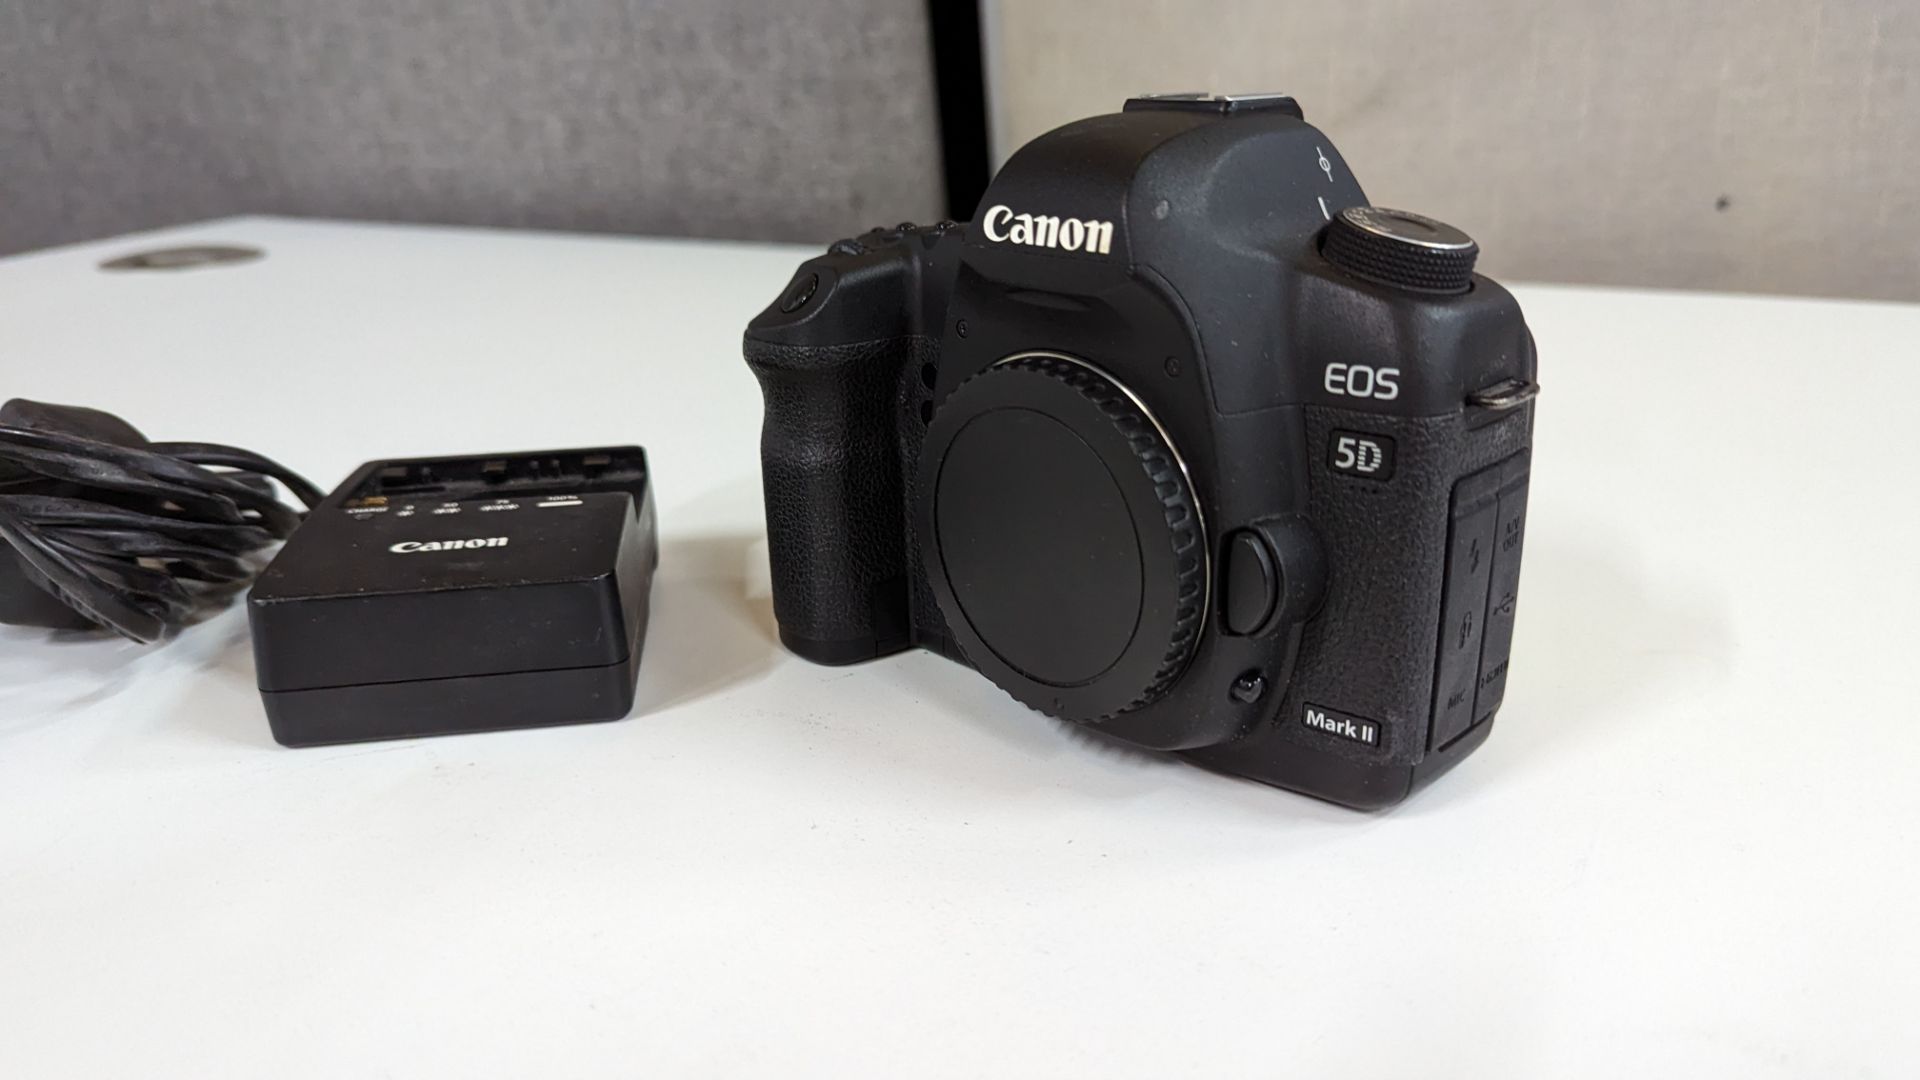 Canon EOS 5D Mark II digital camera plus Canon battery charger. N.B. no lens or battery included wi - Image 7 of 11